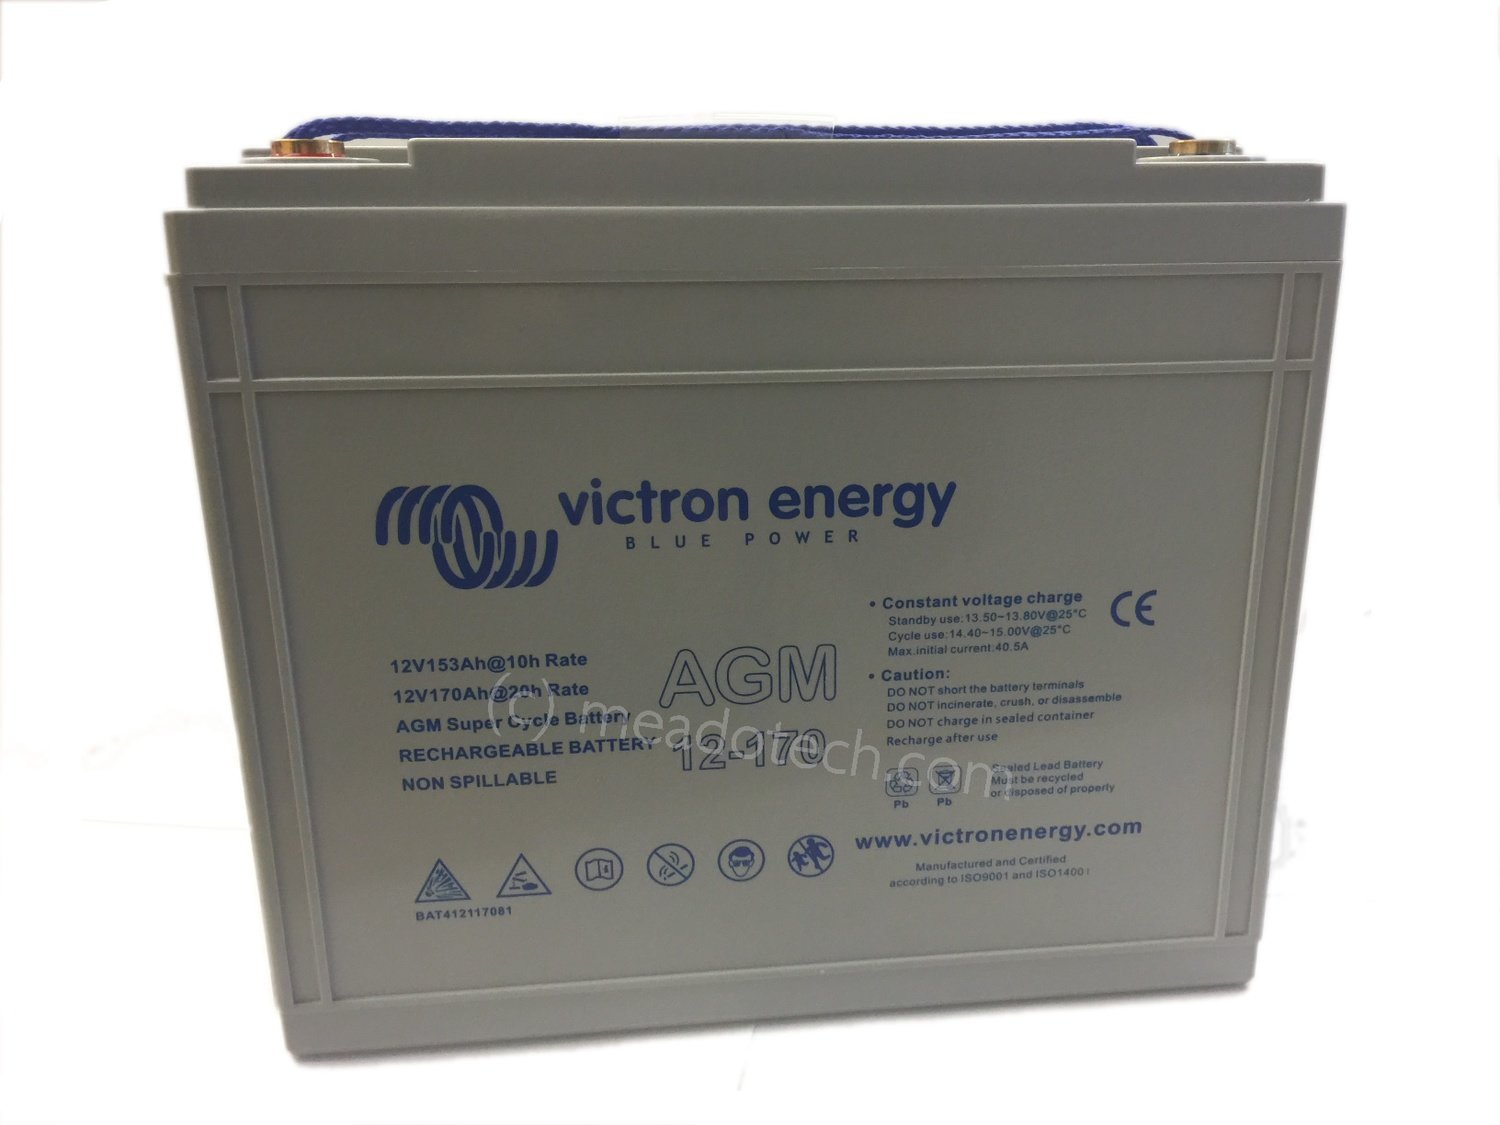 Victron Energy 12V 170 Ah AGM Super Cycle battery M8-insert 4-Pack